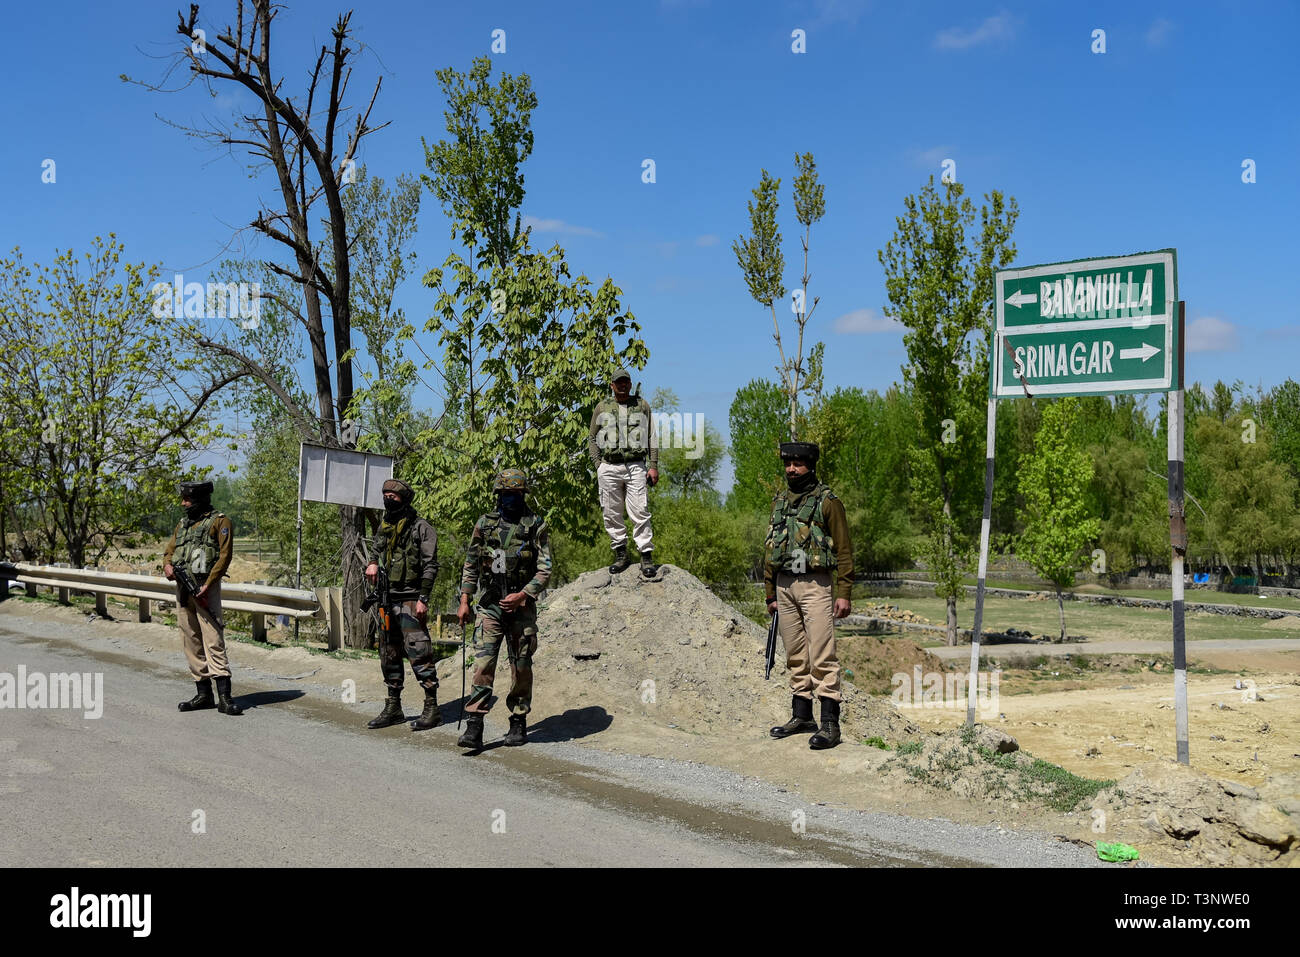 Indian army men seen standing alert to safeguard the movement of Indian convoys at the National Highway on the outskirts of Srinagar. The Indian authorities on Wednesday April 3, banned civilian traffic movement on the Jammu-Srinagar highway on Sundays and Wednesdays from 4 a.m. to 5 p.m. to ensure the safety of the Indian security convoys following a suicide attack on Indian army convoy in Pulwama on Thursday, February 14 which killed more than 50 Indian Army men. Stock Photo